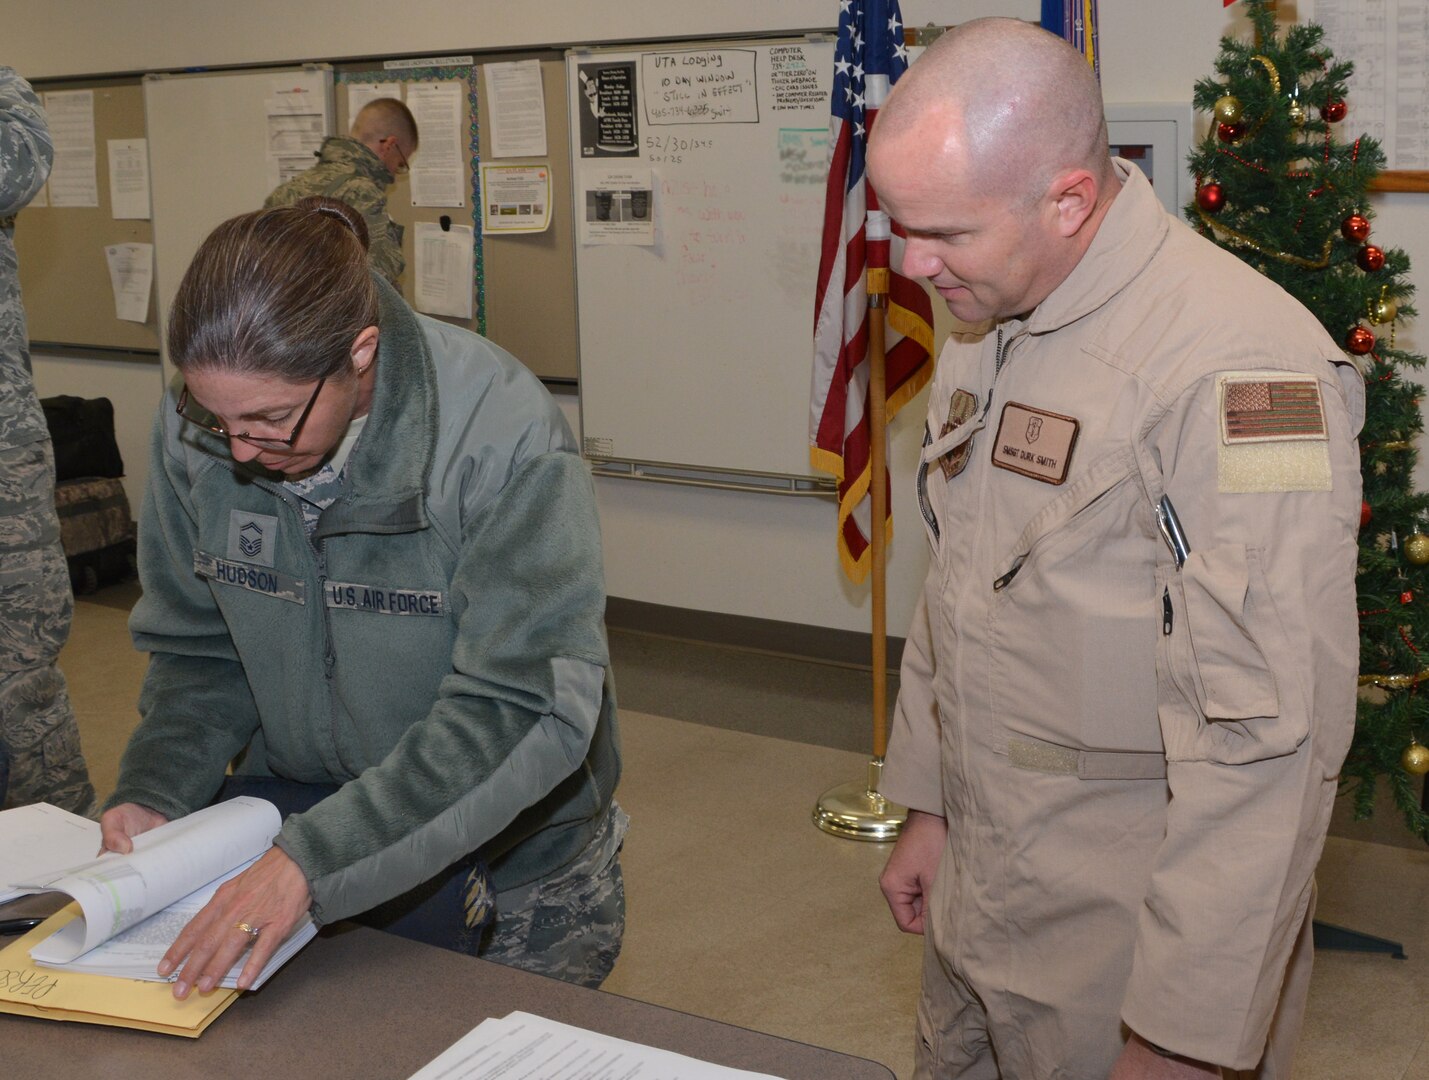 Senior Master Sgt. Durk Smith, a medical flight technician assigned to the 465th Air Refueling Squadron has his deployment orders reviewed prior to deploying by Senior Master Sgt. Julie Hudson, 507th Logistics Readiness Squadron distribution flight superintendent at Tinker Air Force Base, Oklahoma, December 12, 2016. (This image was blurred for operational security/U.S. Air Force Photo/Tech. Sgt. Lauren Gleason)